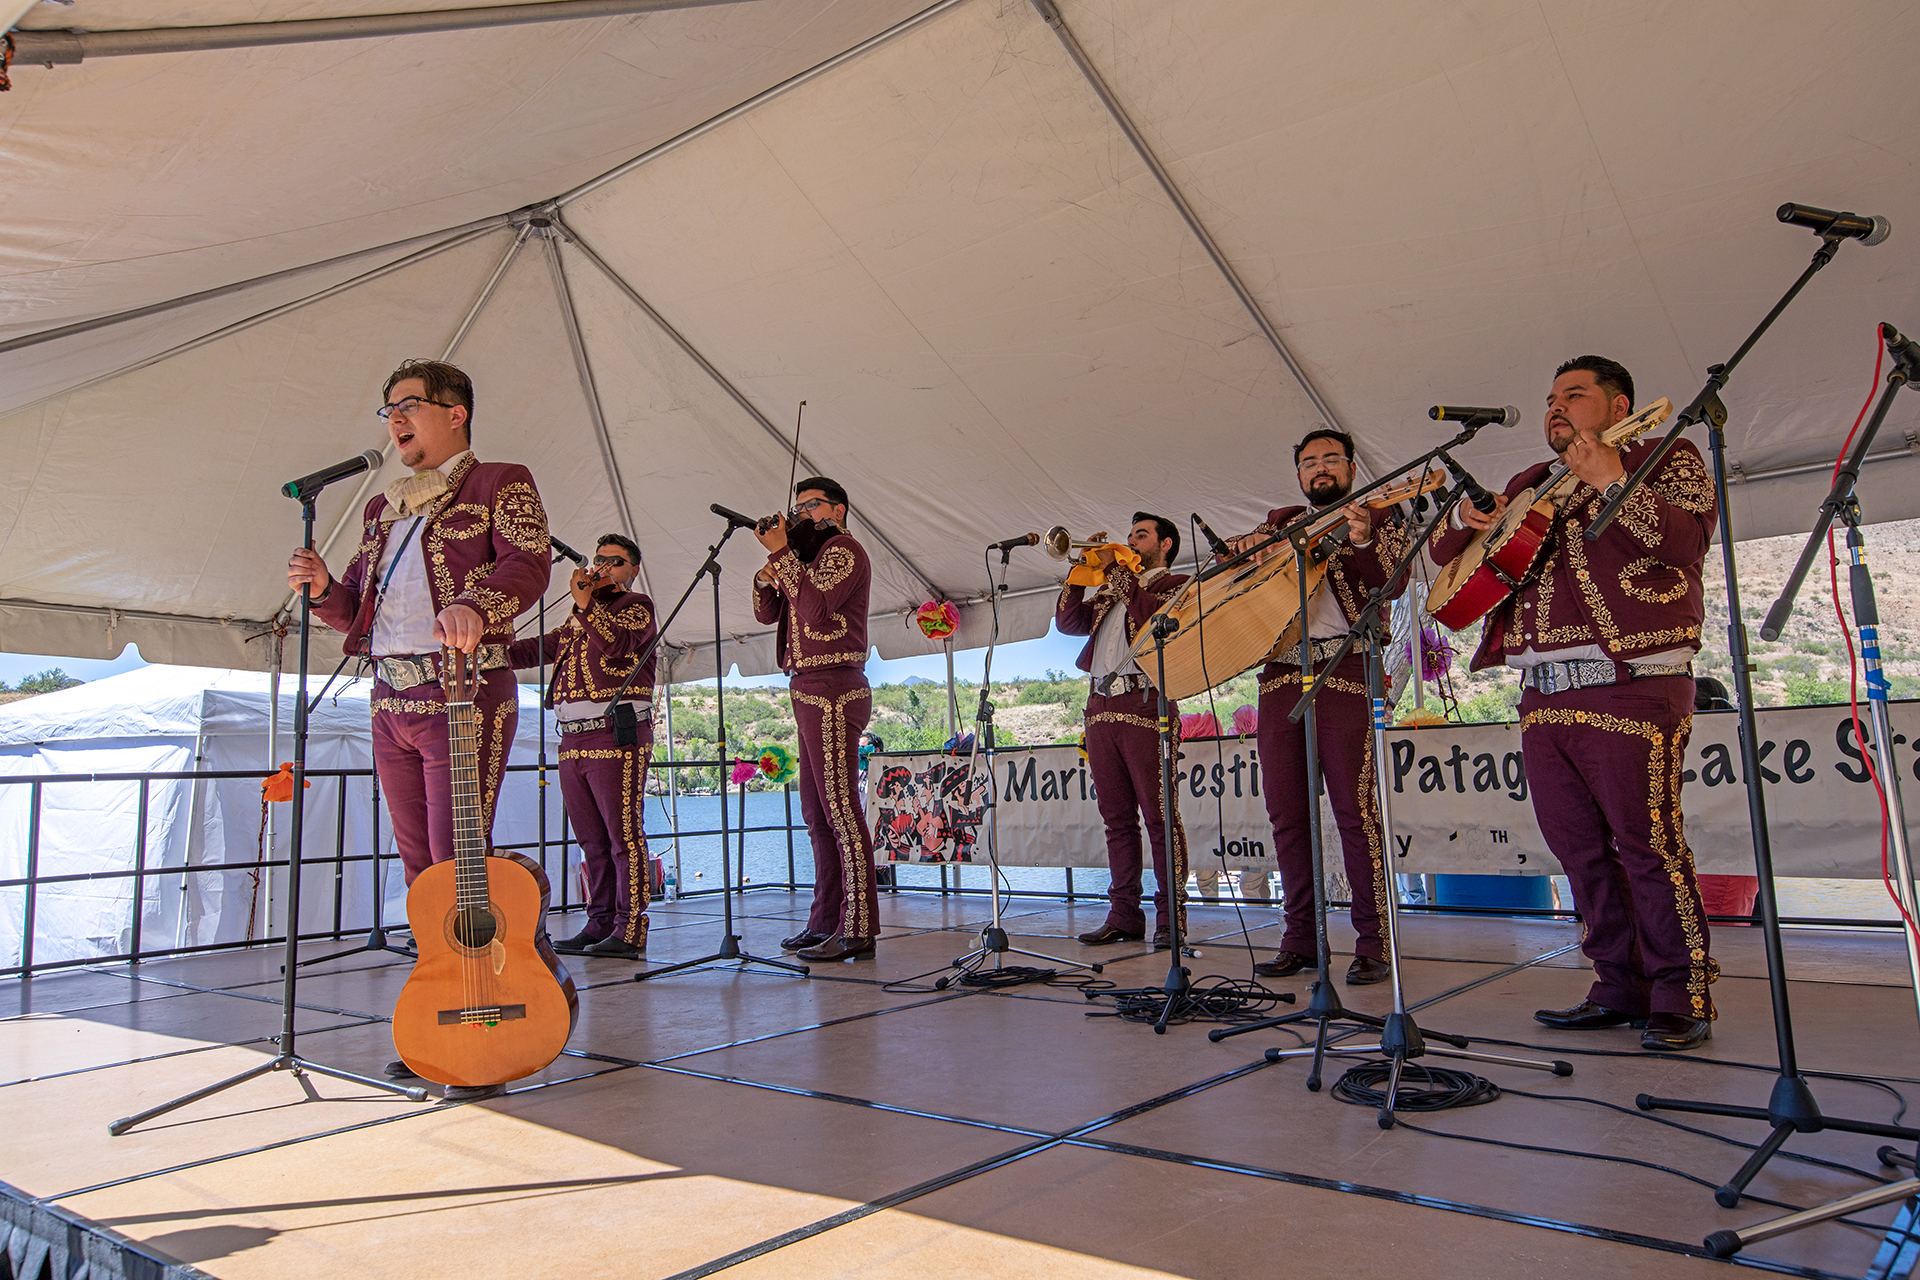 A mariachi band wearing maroon and gold suits sing and play their instruments on a stage.